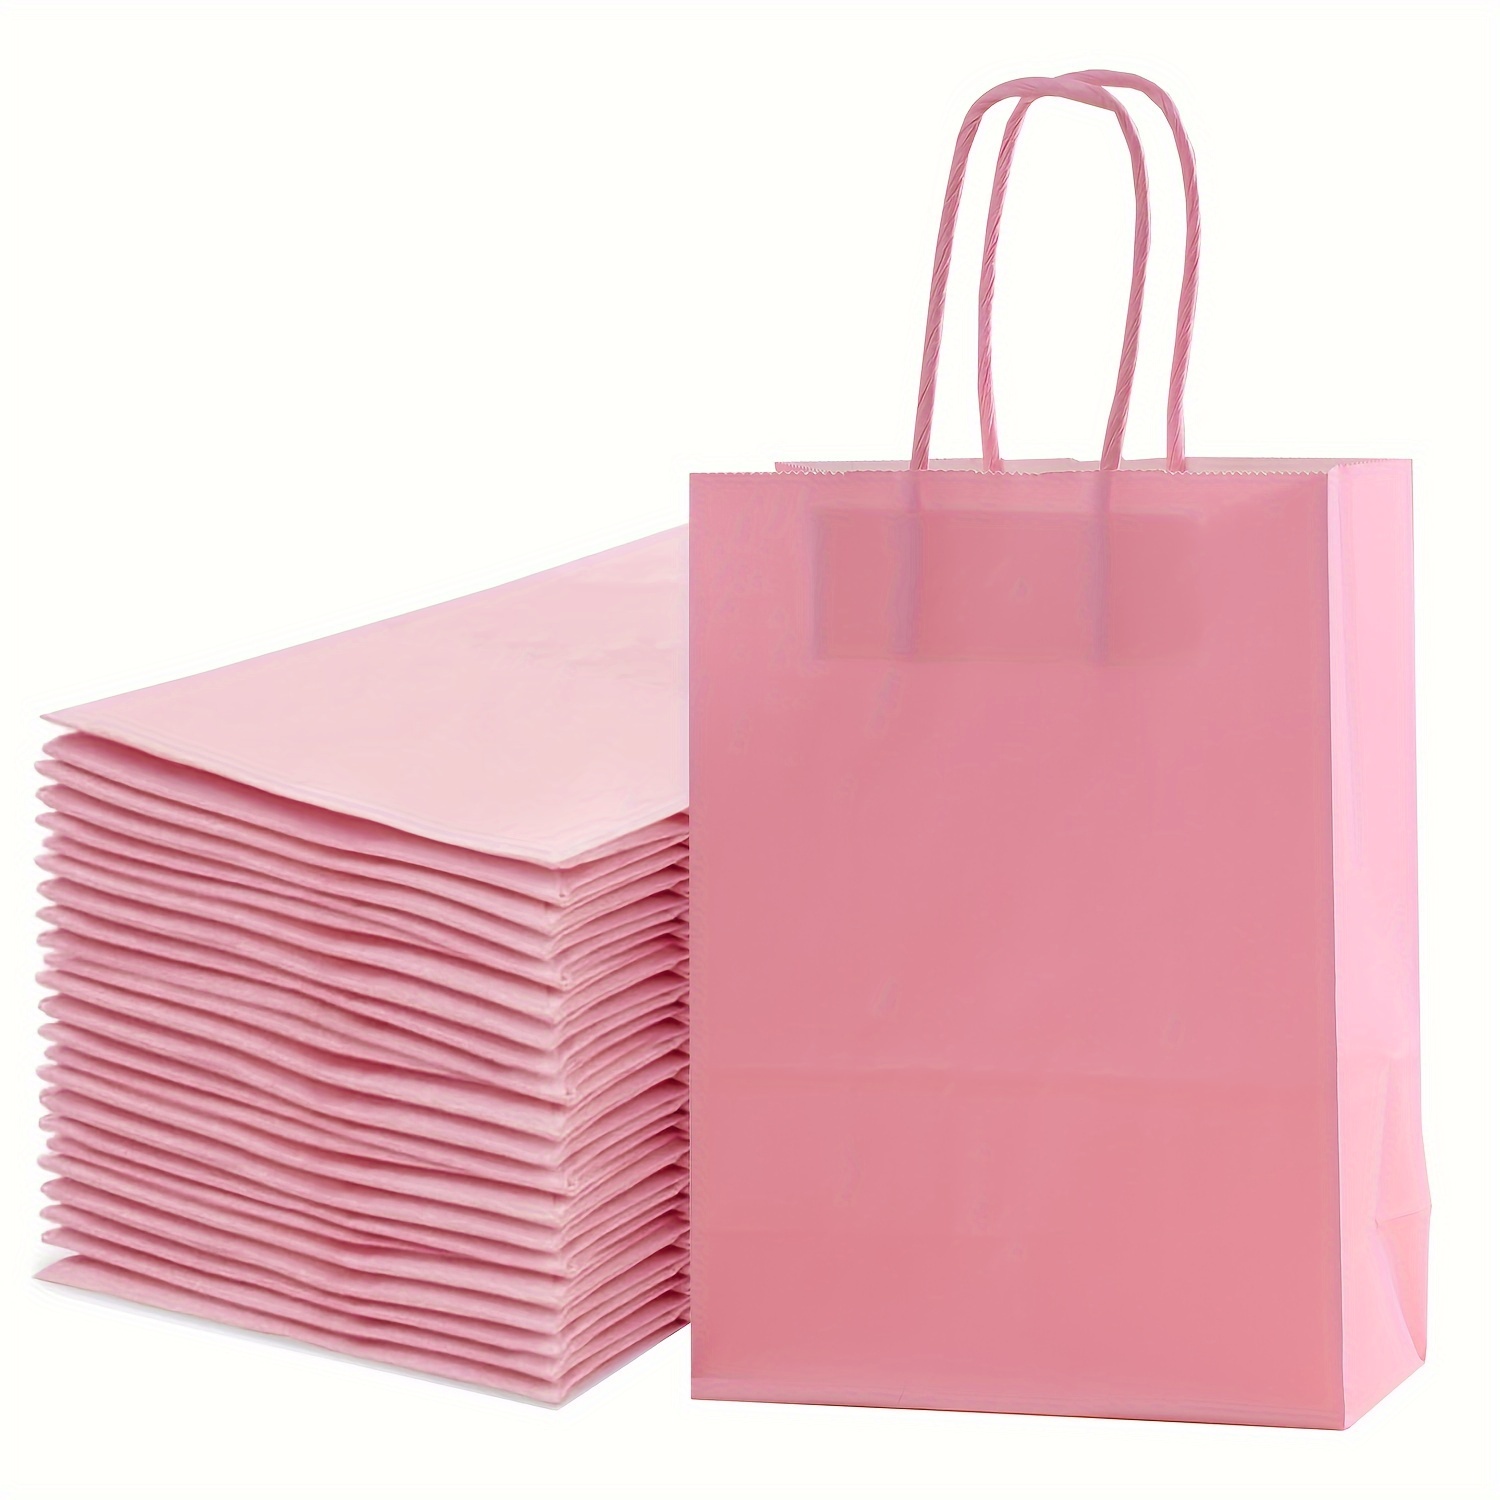 

24-piece Pink Gift Bags 6.3x8.7x3.1" - Versatile For Birthdays, Weddings & More | Reusable Shopping & Takeout Bags With Handles